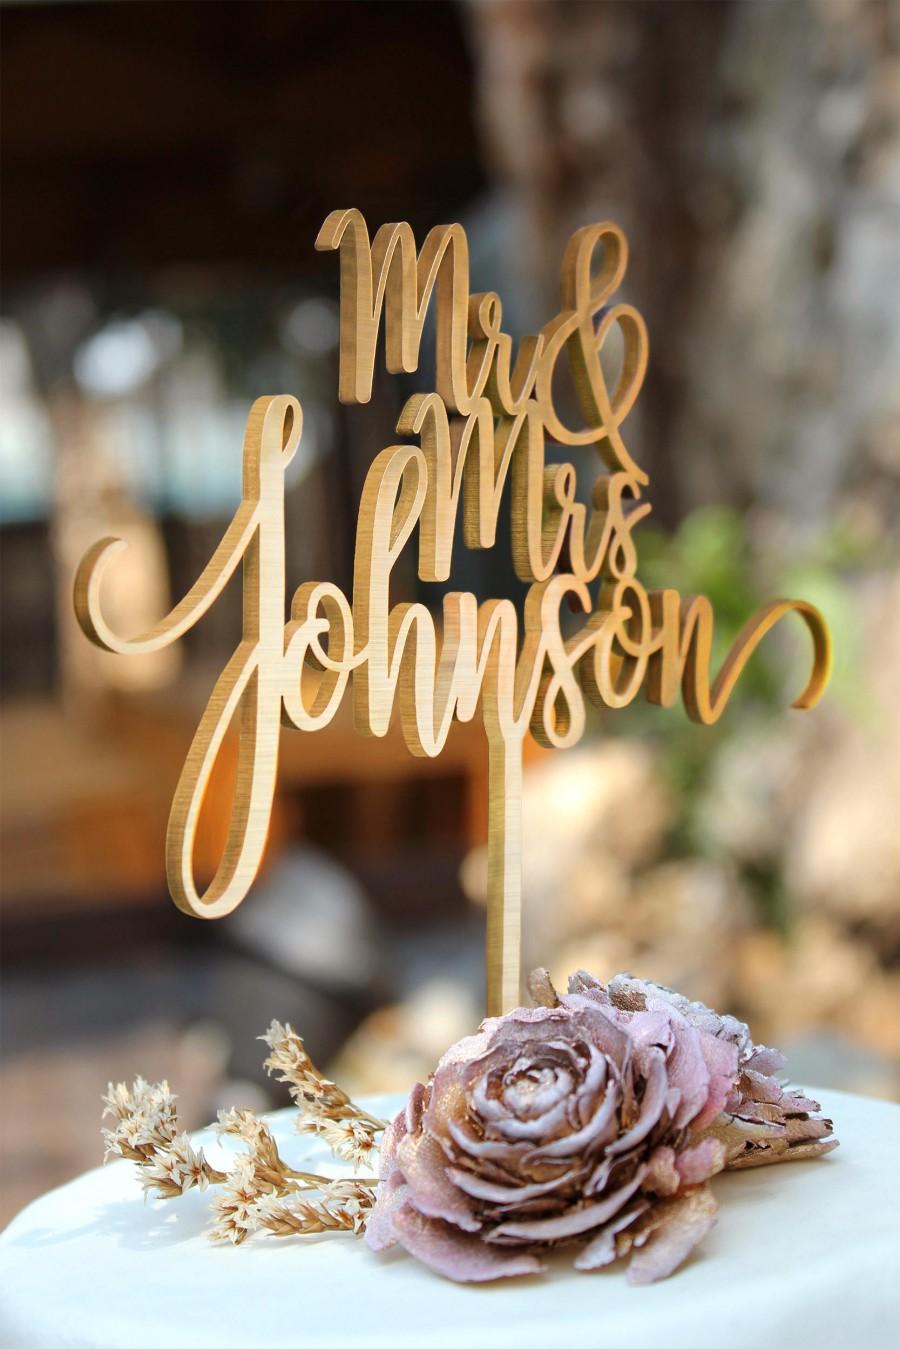 Wedding - Personalized Cake Topper for Wedding, Custom Personalized Wedding Cake Topper, Customized Wedding Cake Topper, Mr and Mrs Cake Topper 29